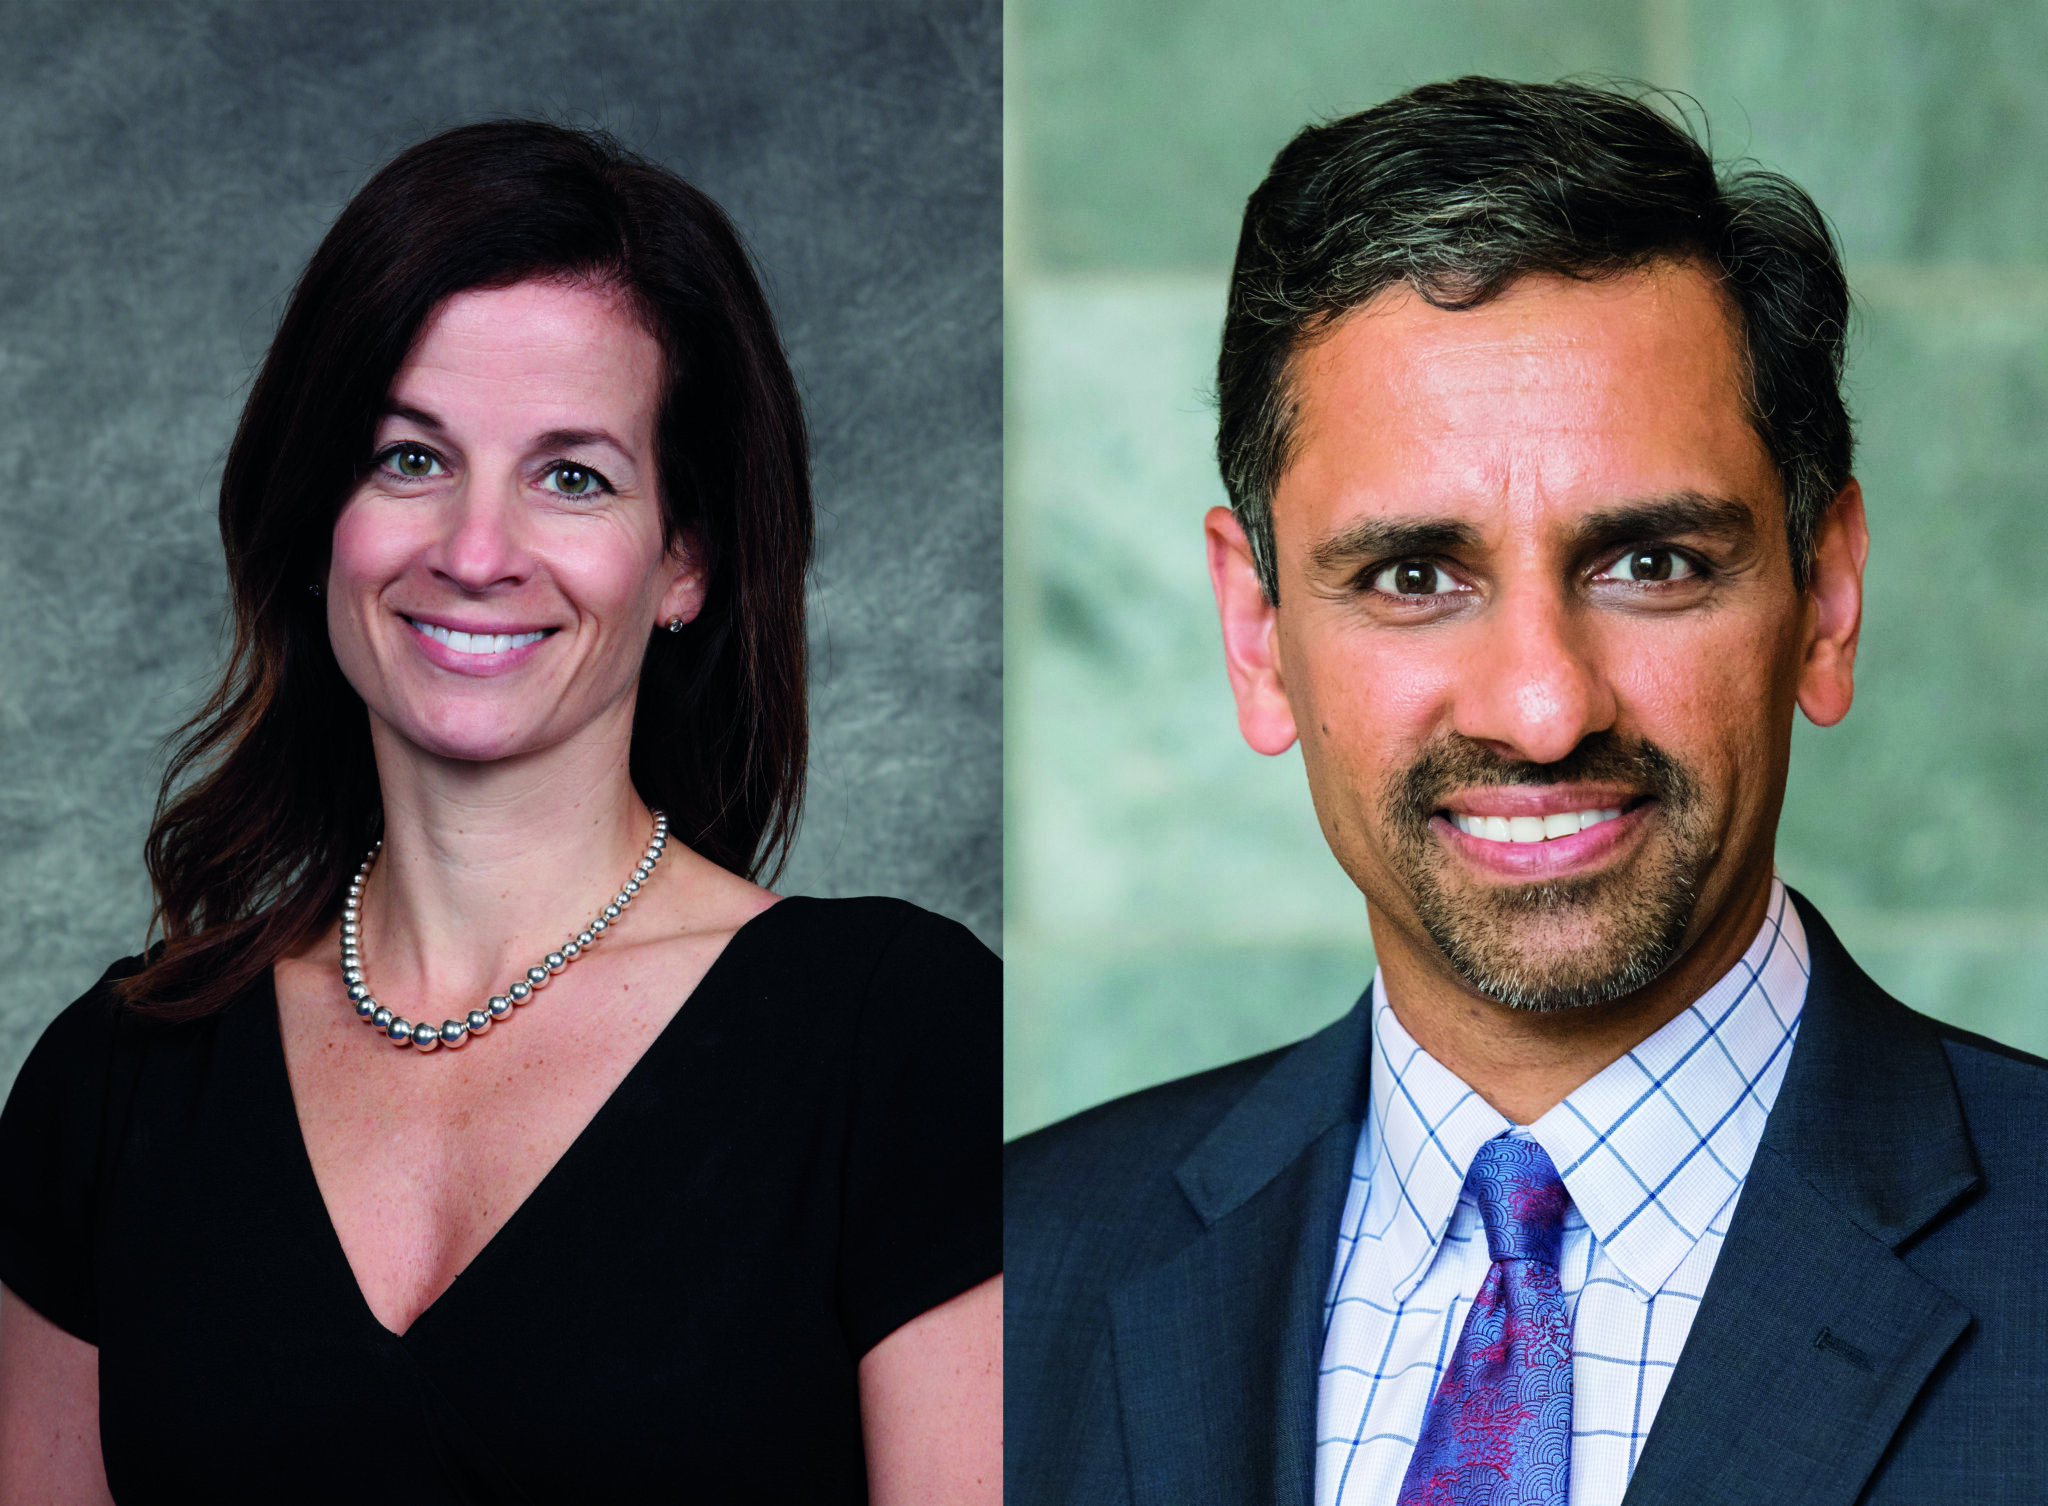 SVS Foundation adds two surgeons to board of directors